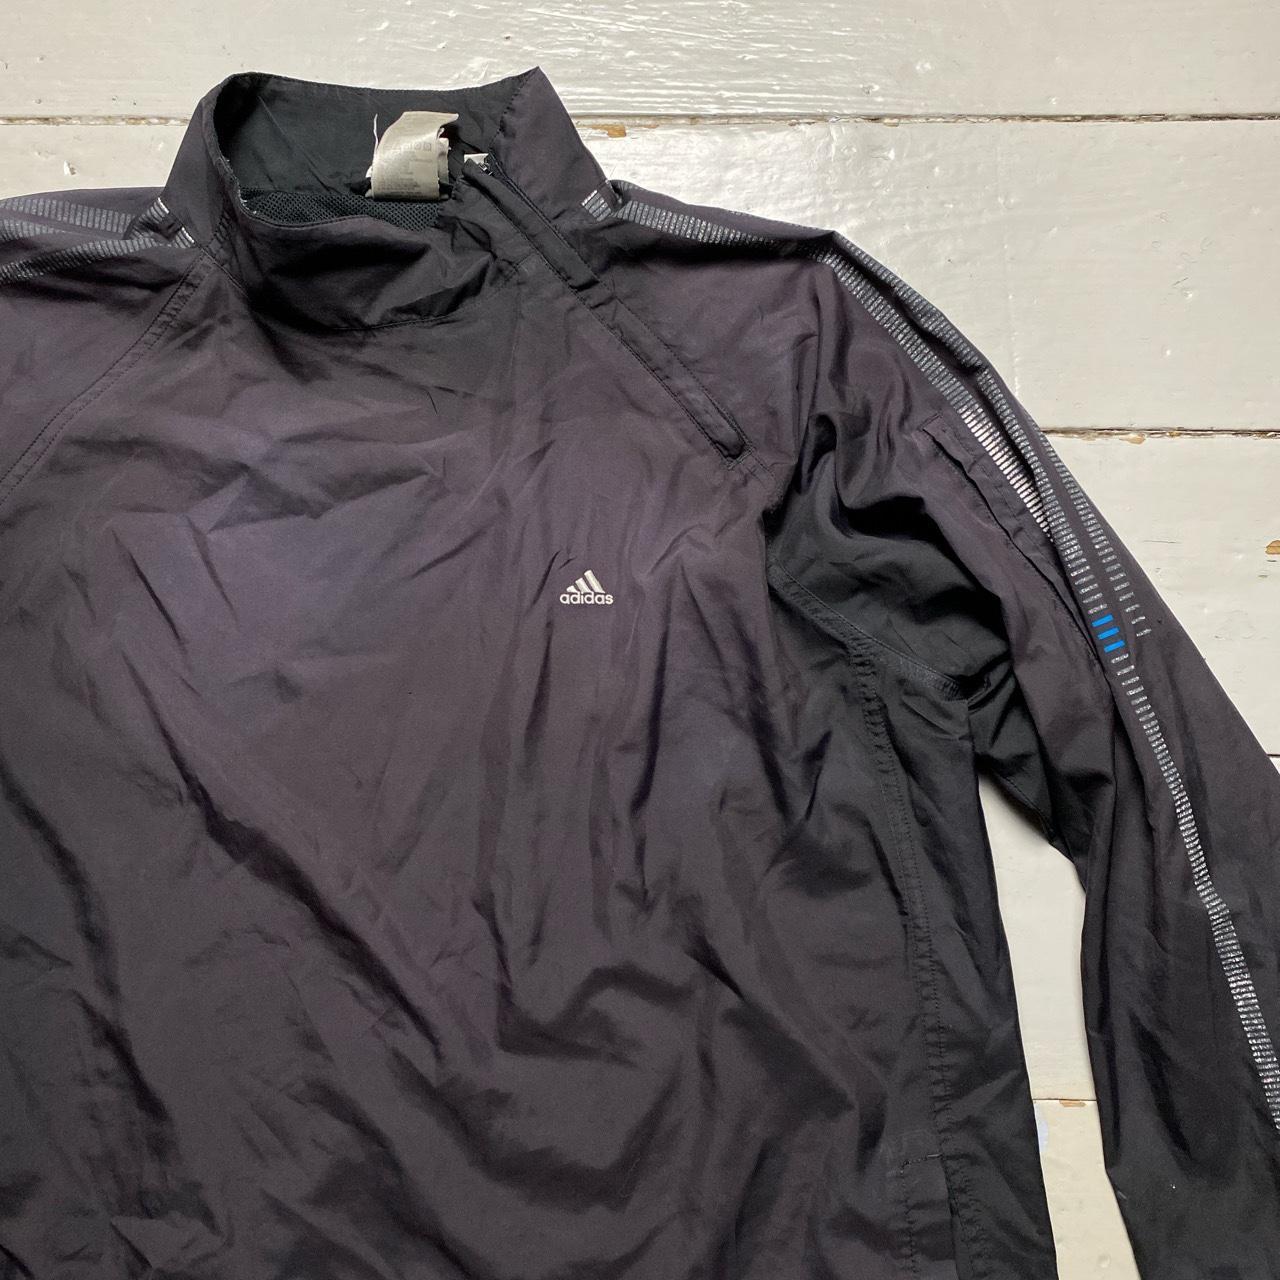 Adidas Vintage Baggy Shell Track Jacket Black and White